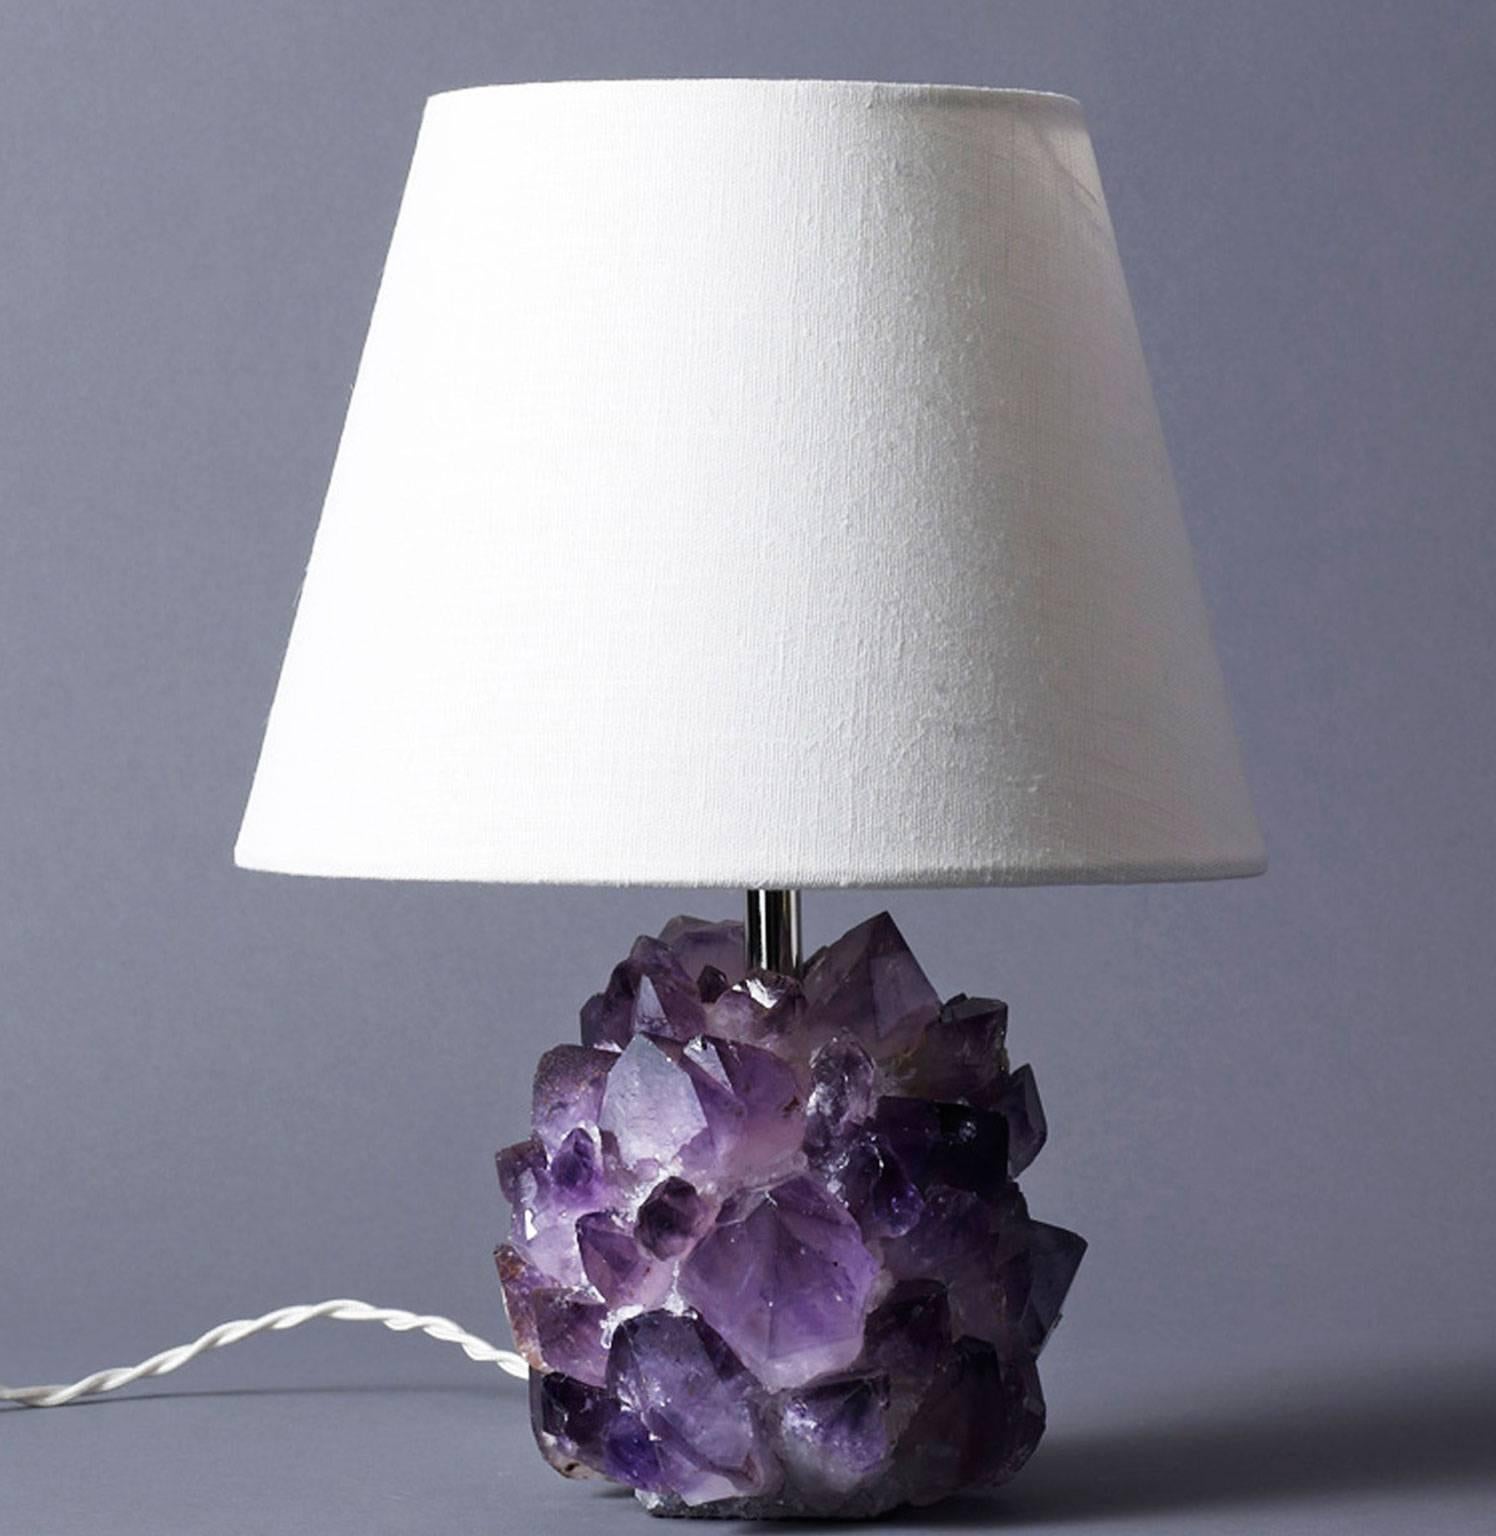 Liz O'Brien Editions
Pair of small-scale table lamps in natural amethyst rock crystal with twisted silk cord in a variety of colors. Lampshade not included.
Made to order. Can be purchased as a single or as a pair.